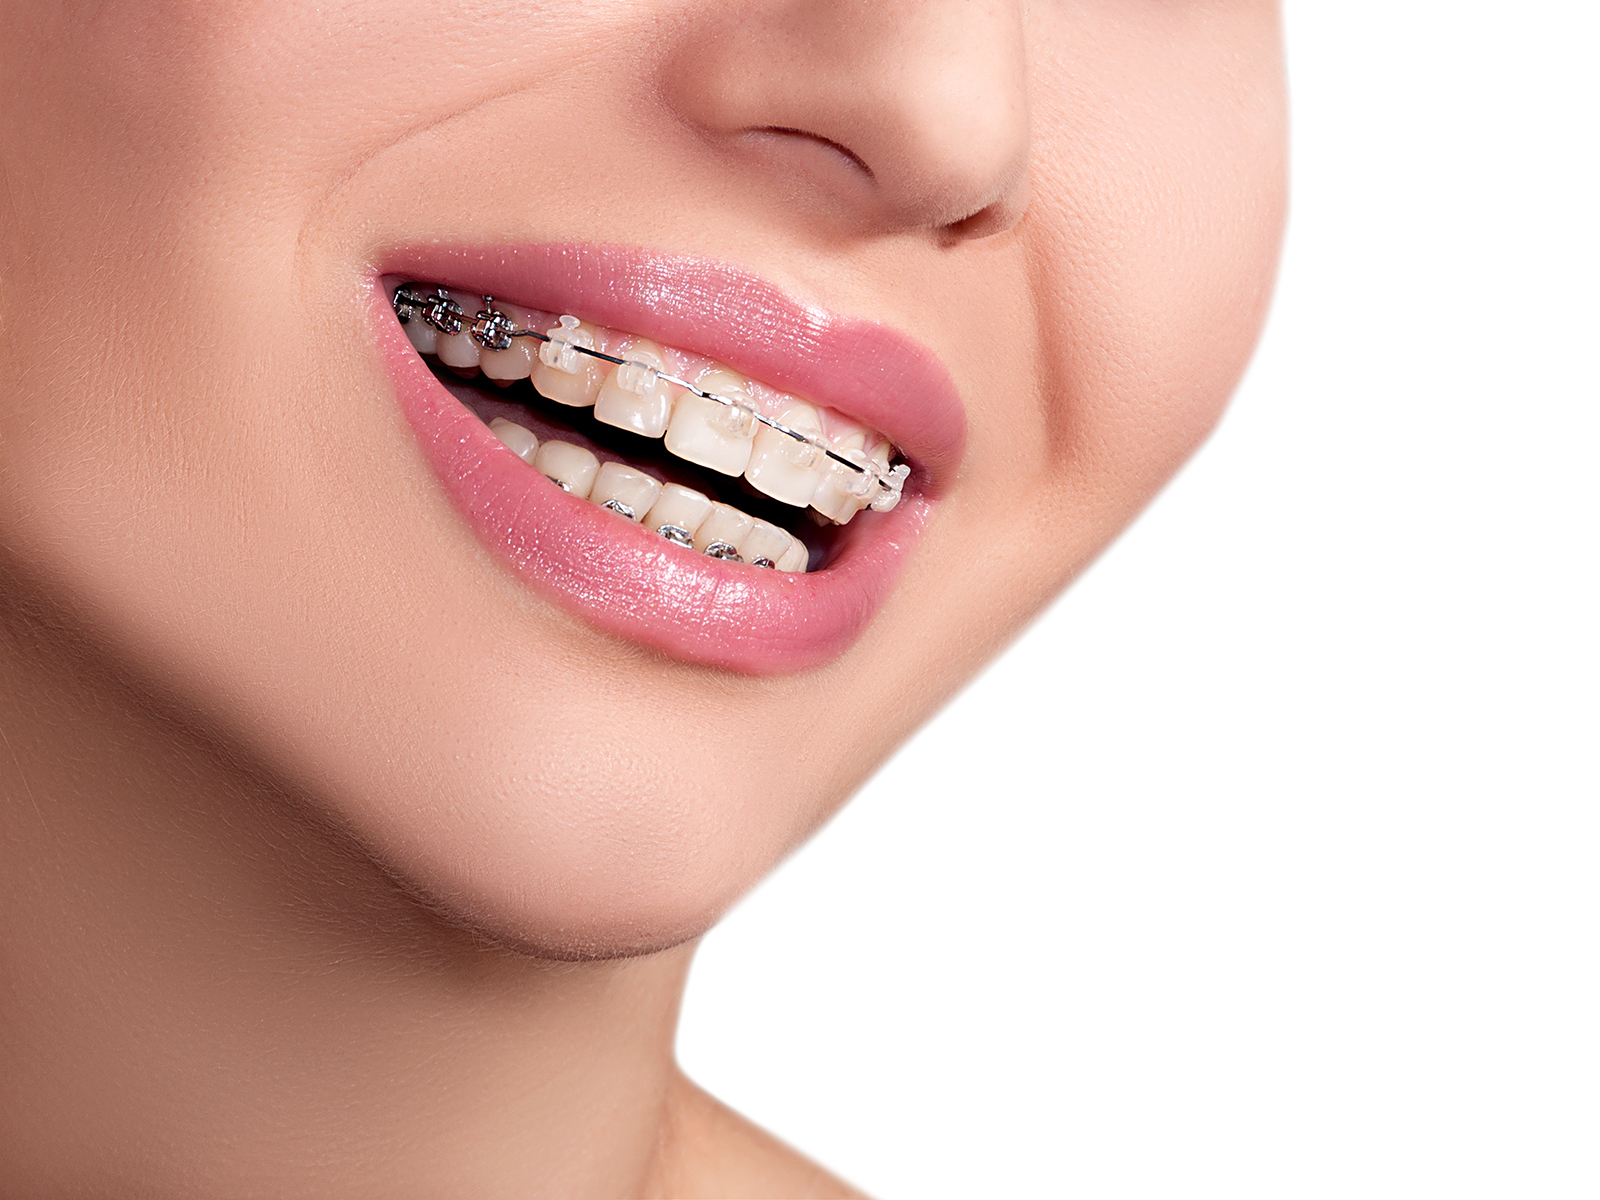 What happens if your braces don’t get tightened?